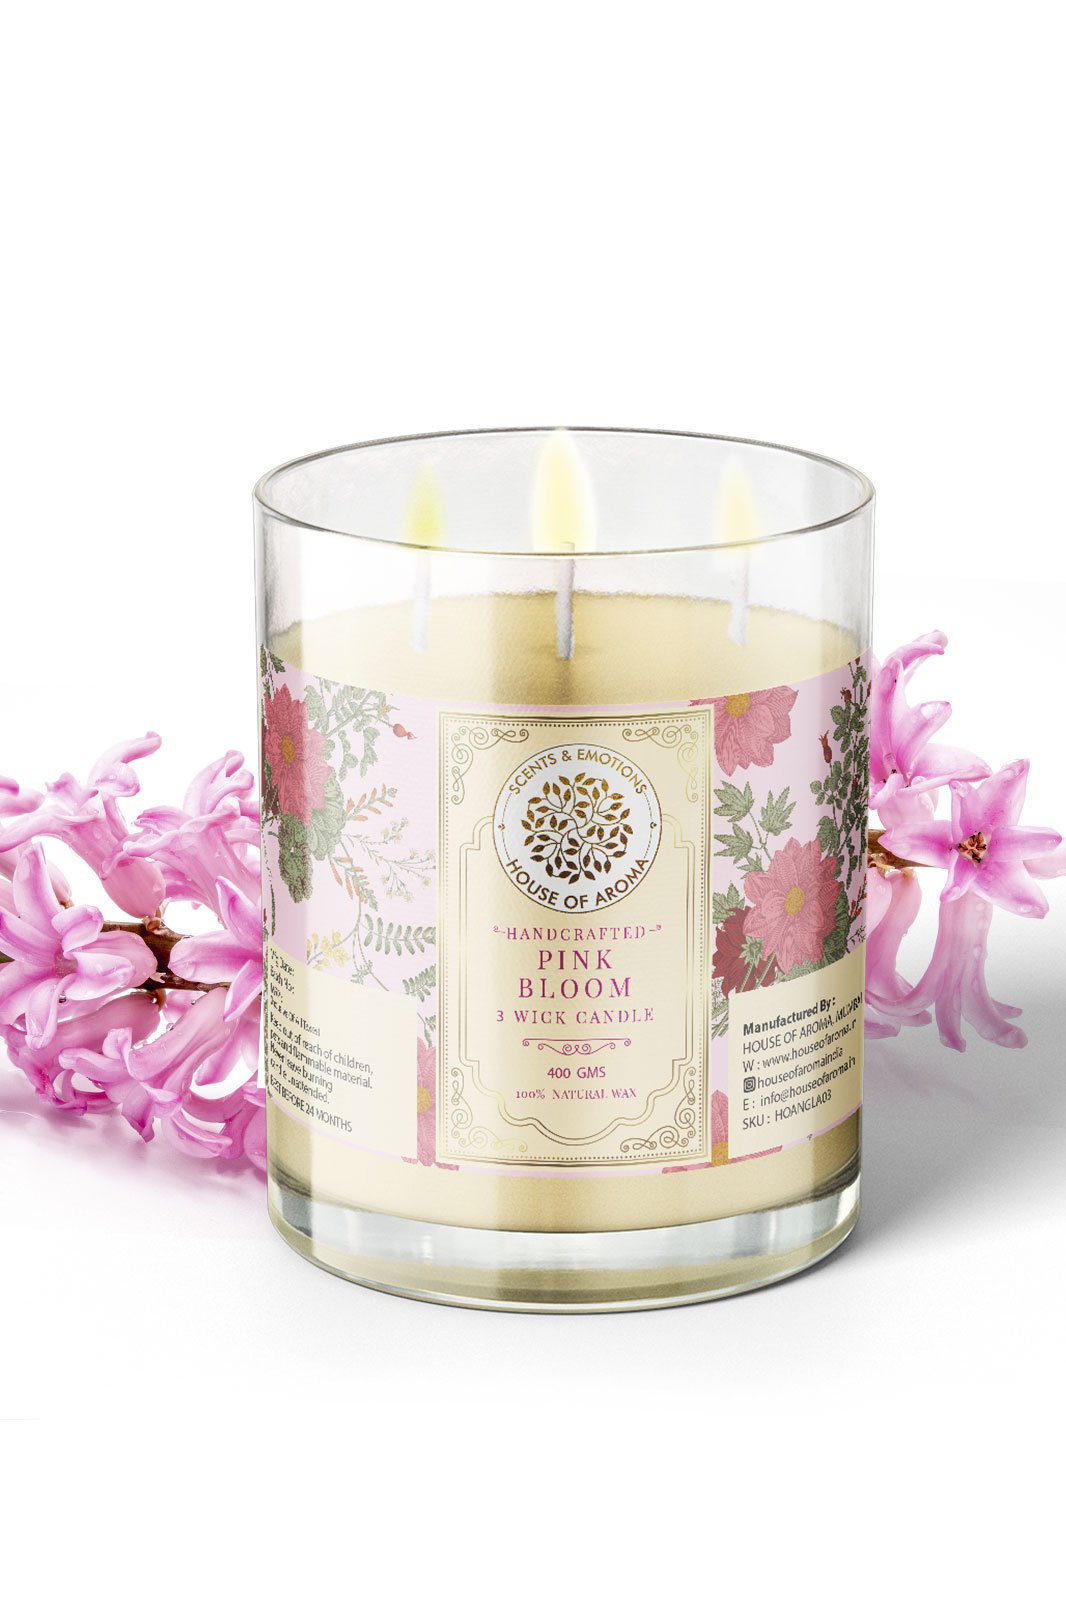 natural wax pink bloom candle 3 wicks, floral scented candles, 3 wicks scented candles, 3 wicks candles, scented 3 wick candles, scented candles flavours, best-scented flowers in India, scented candles for decoration, best 3 wick scented candles, 3 wick jar candles, scented candles for living room, best floral scented candles, 3 wick soy candles, flower scented candles, popular floral candle scents, most popular floral candle scents, highly scented 3 wick candles, floral scents for candles, large 3 wick scented pillar candles, floral fragrance scented candles, floral scent for candles, most fragrant scented candles, pink floral scented candles, most common scented candles, floral candle fragrance oil, floral aromatherapy candle, home decor candles, decoration with candles, room decor with candles, home decor candle, scented candles decoration